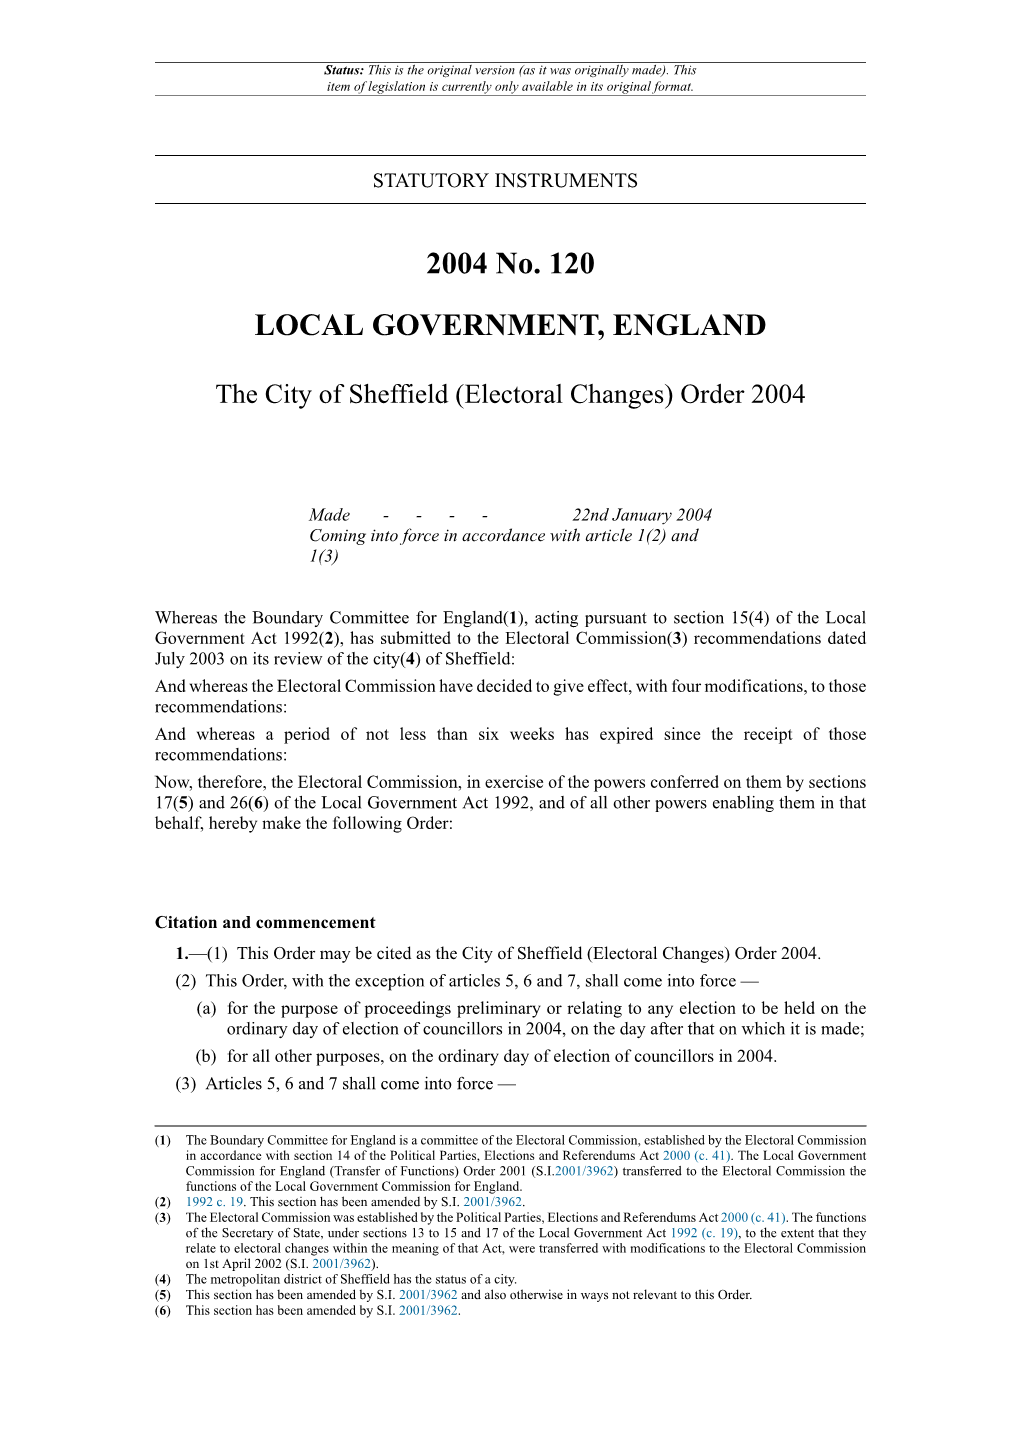 The City of Sheffield (Electoral Changes) Order 2004